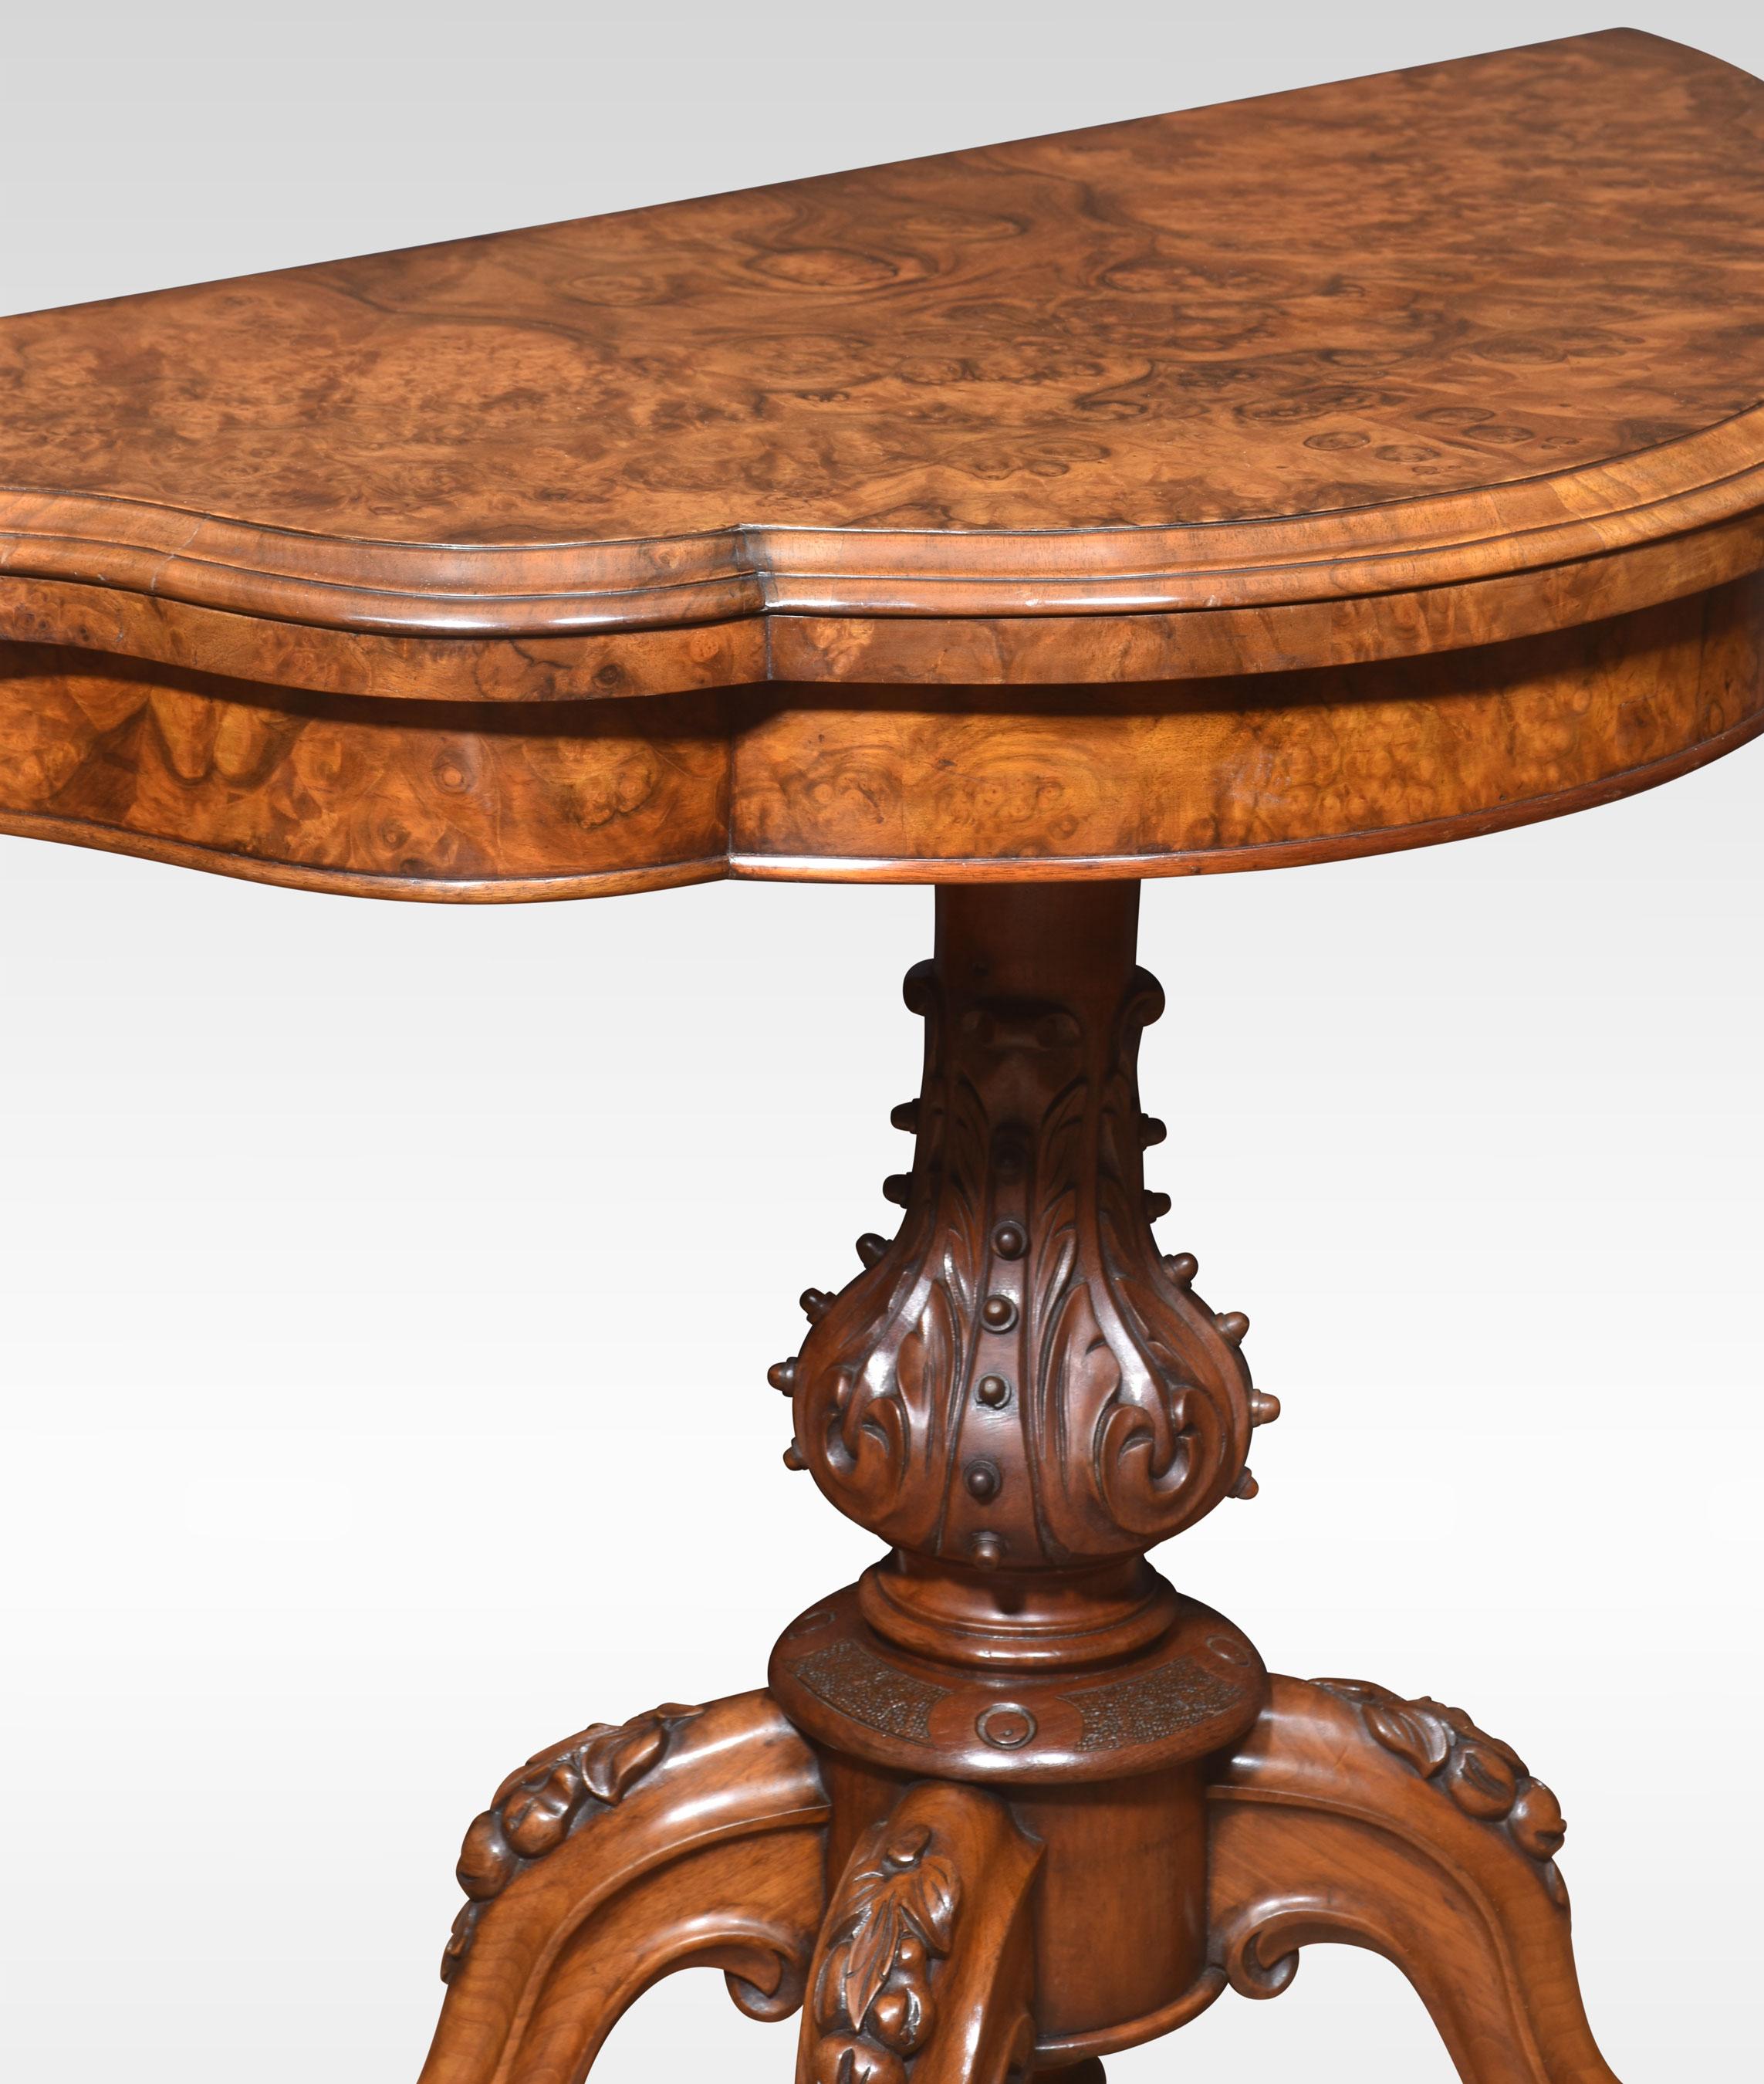 Walnut serpentine front card table. The folding and swivel burr walnut top opening to reveal an inset baize-lined interior with tooled border. Raised up on a turned and carved stem and conforming scroll legs to the original ceramic